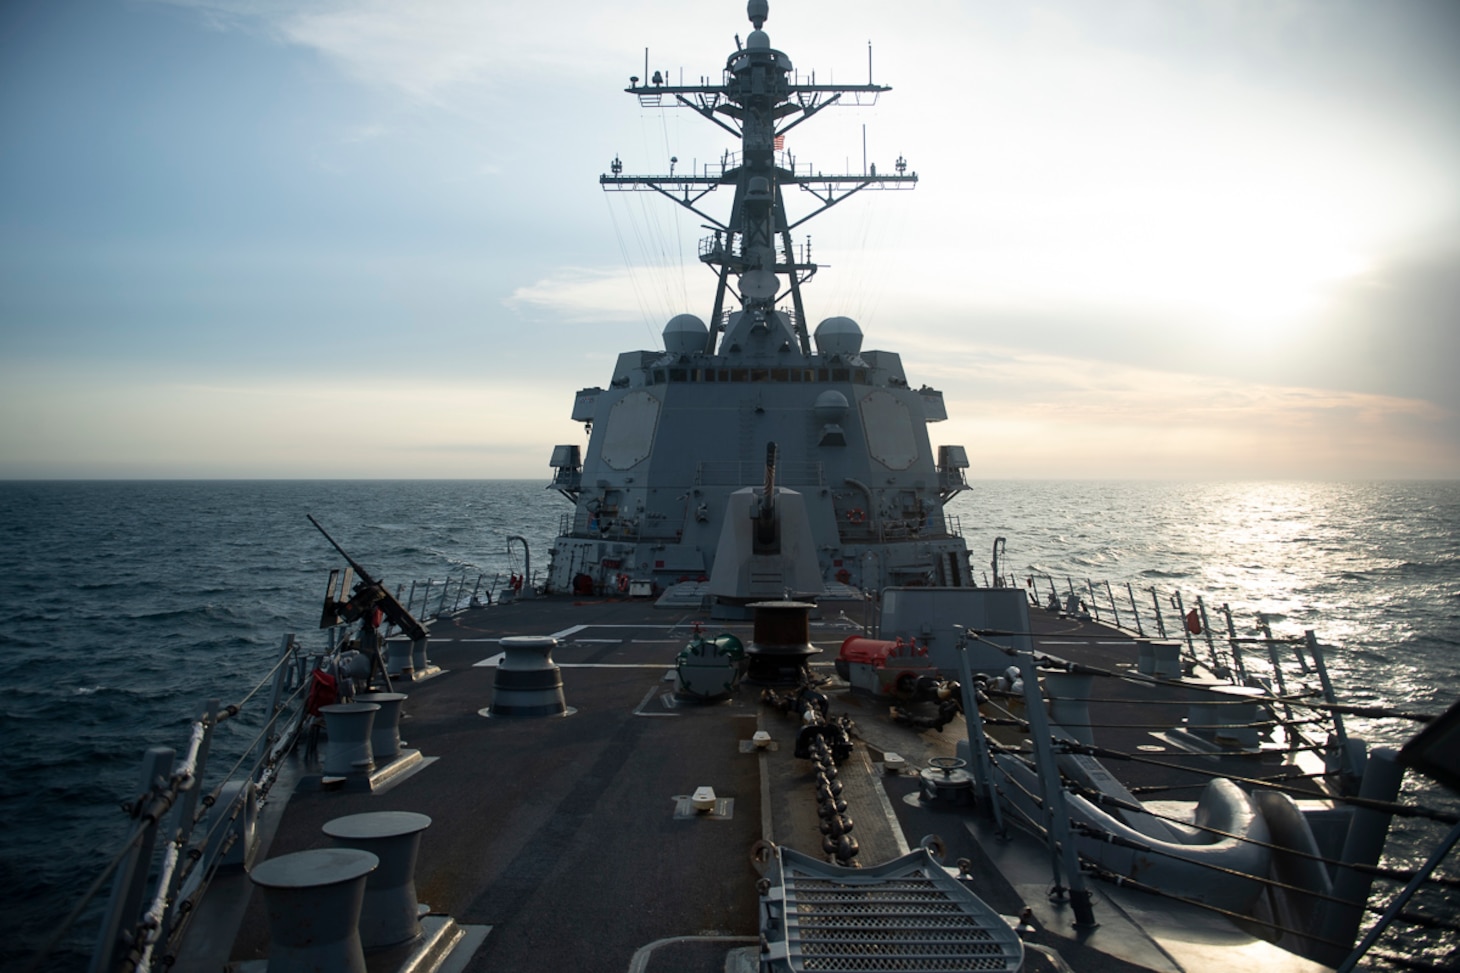 220426-N-CD319-1230 TAIWAN STRAIT (APR. 26, 2022) The Arleigh Burke-class guided-missile destroyer USS Sampson (DDG 102) transits the Taiwan Strait. USS Sampson is forward-deployed to the U.S. 7th Fleet area of operations in support of a free and open Indo-Pacific. (U.S. Navy photo by Mass Communications Specialist 3rd Class Tristan Cookson)